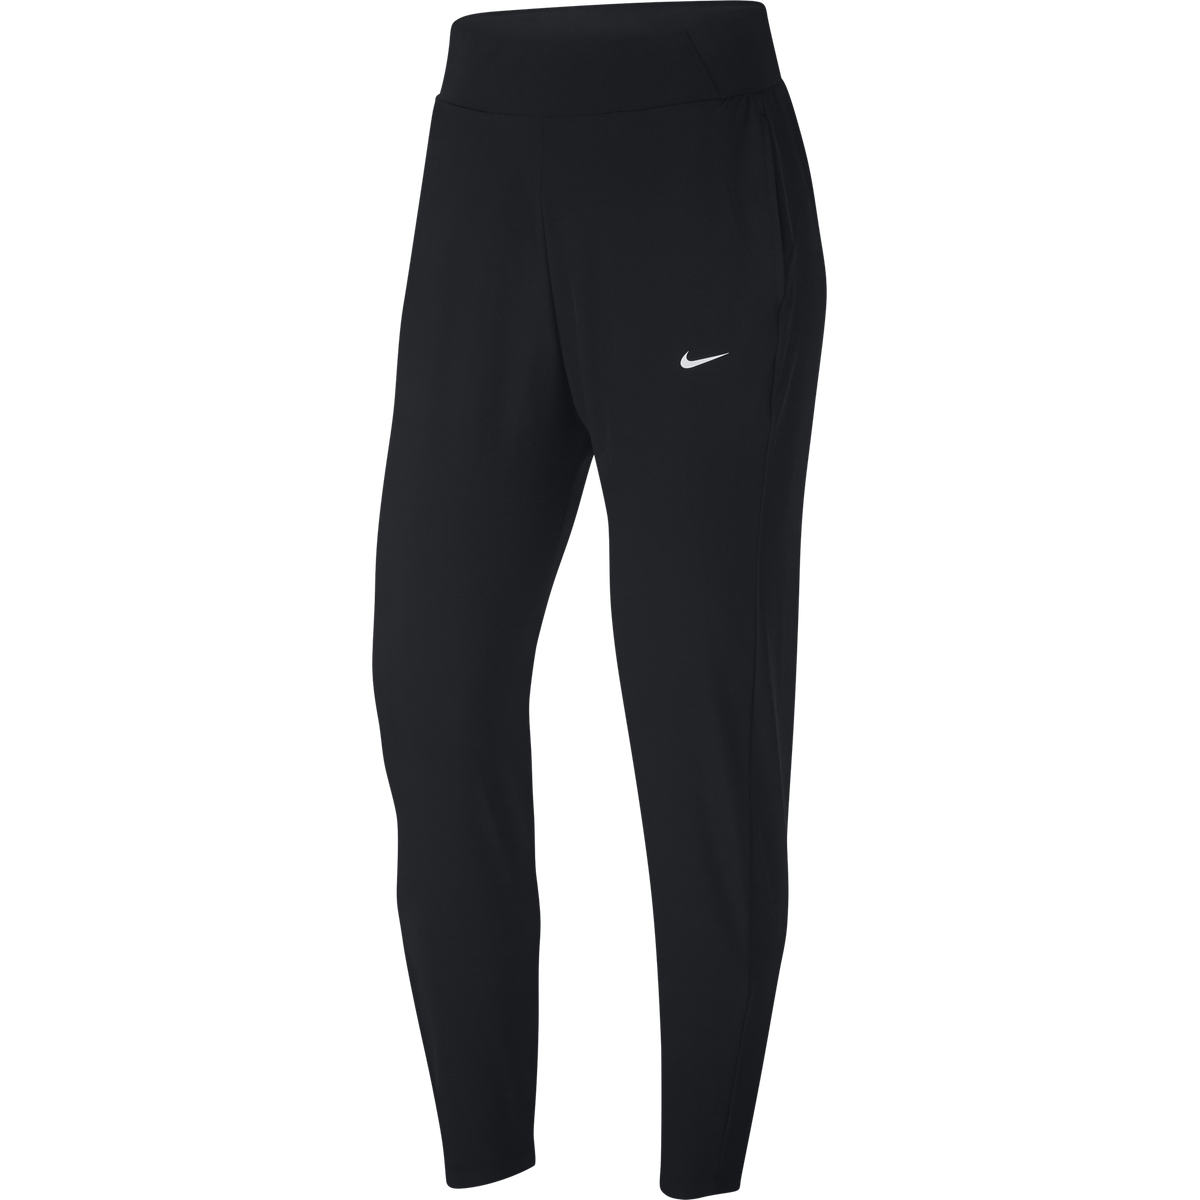 Nike-Women's Nike Dri-FIT Bliss Victory Pant-Black-Pacers Running